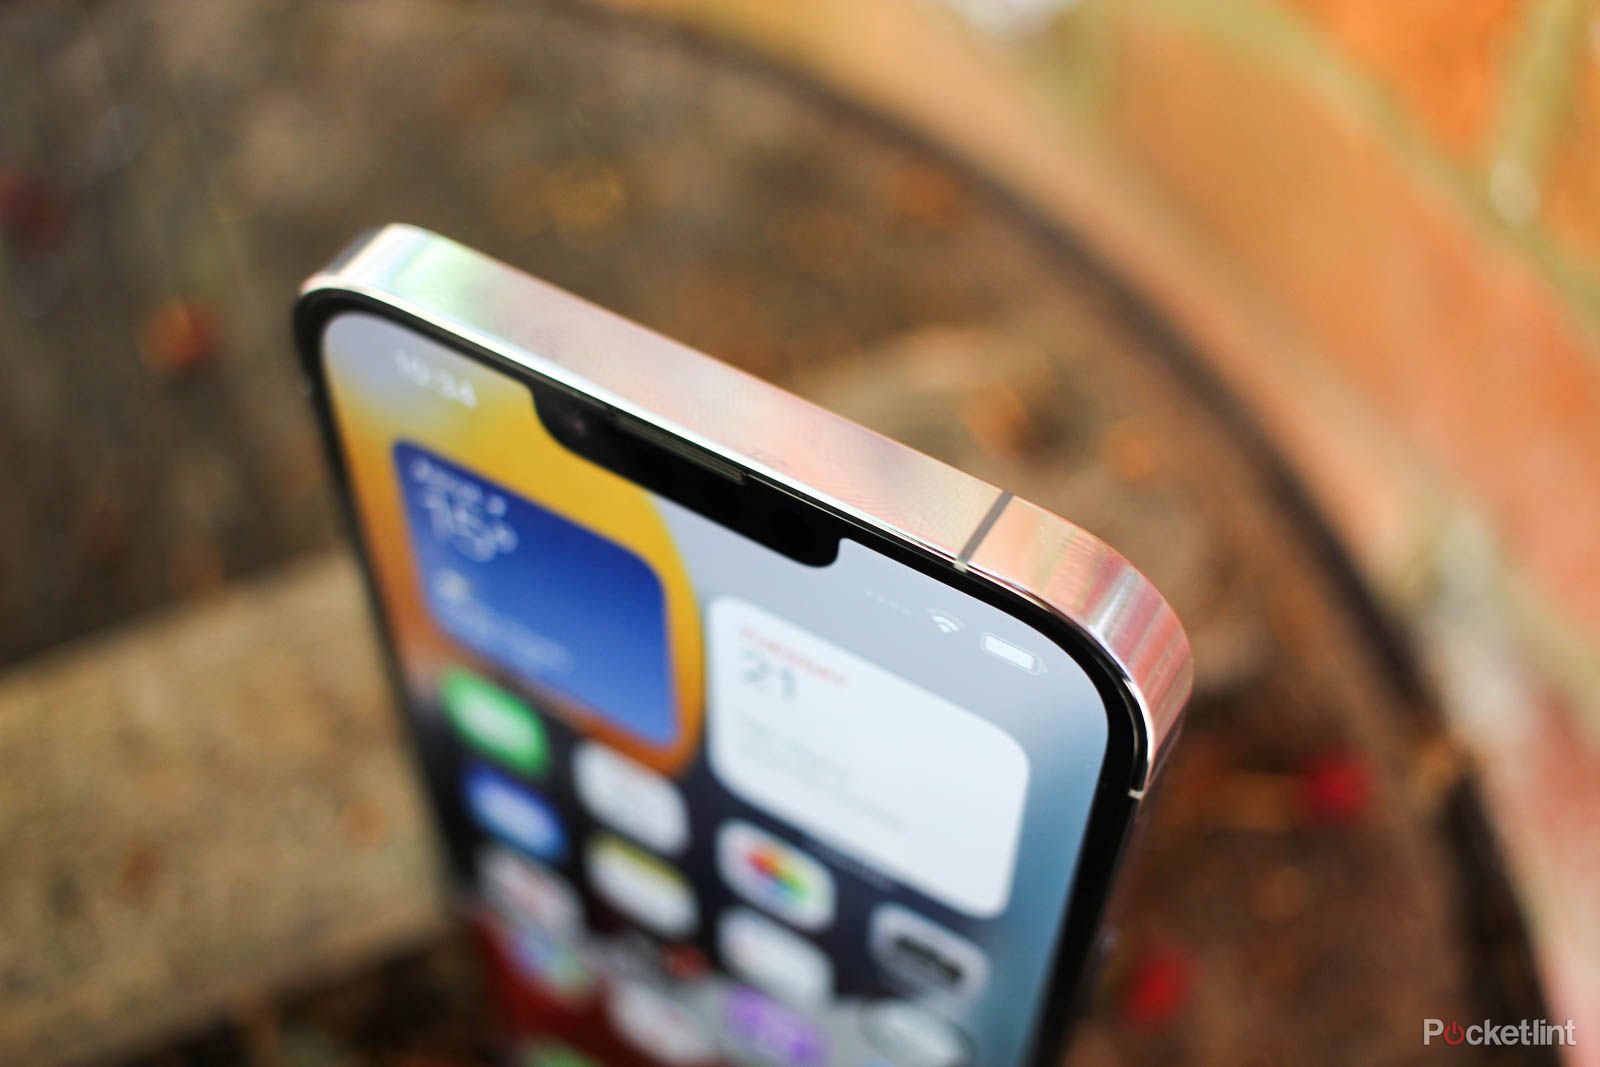 iPhone 13 from the front, showing the Face ID notch.